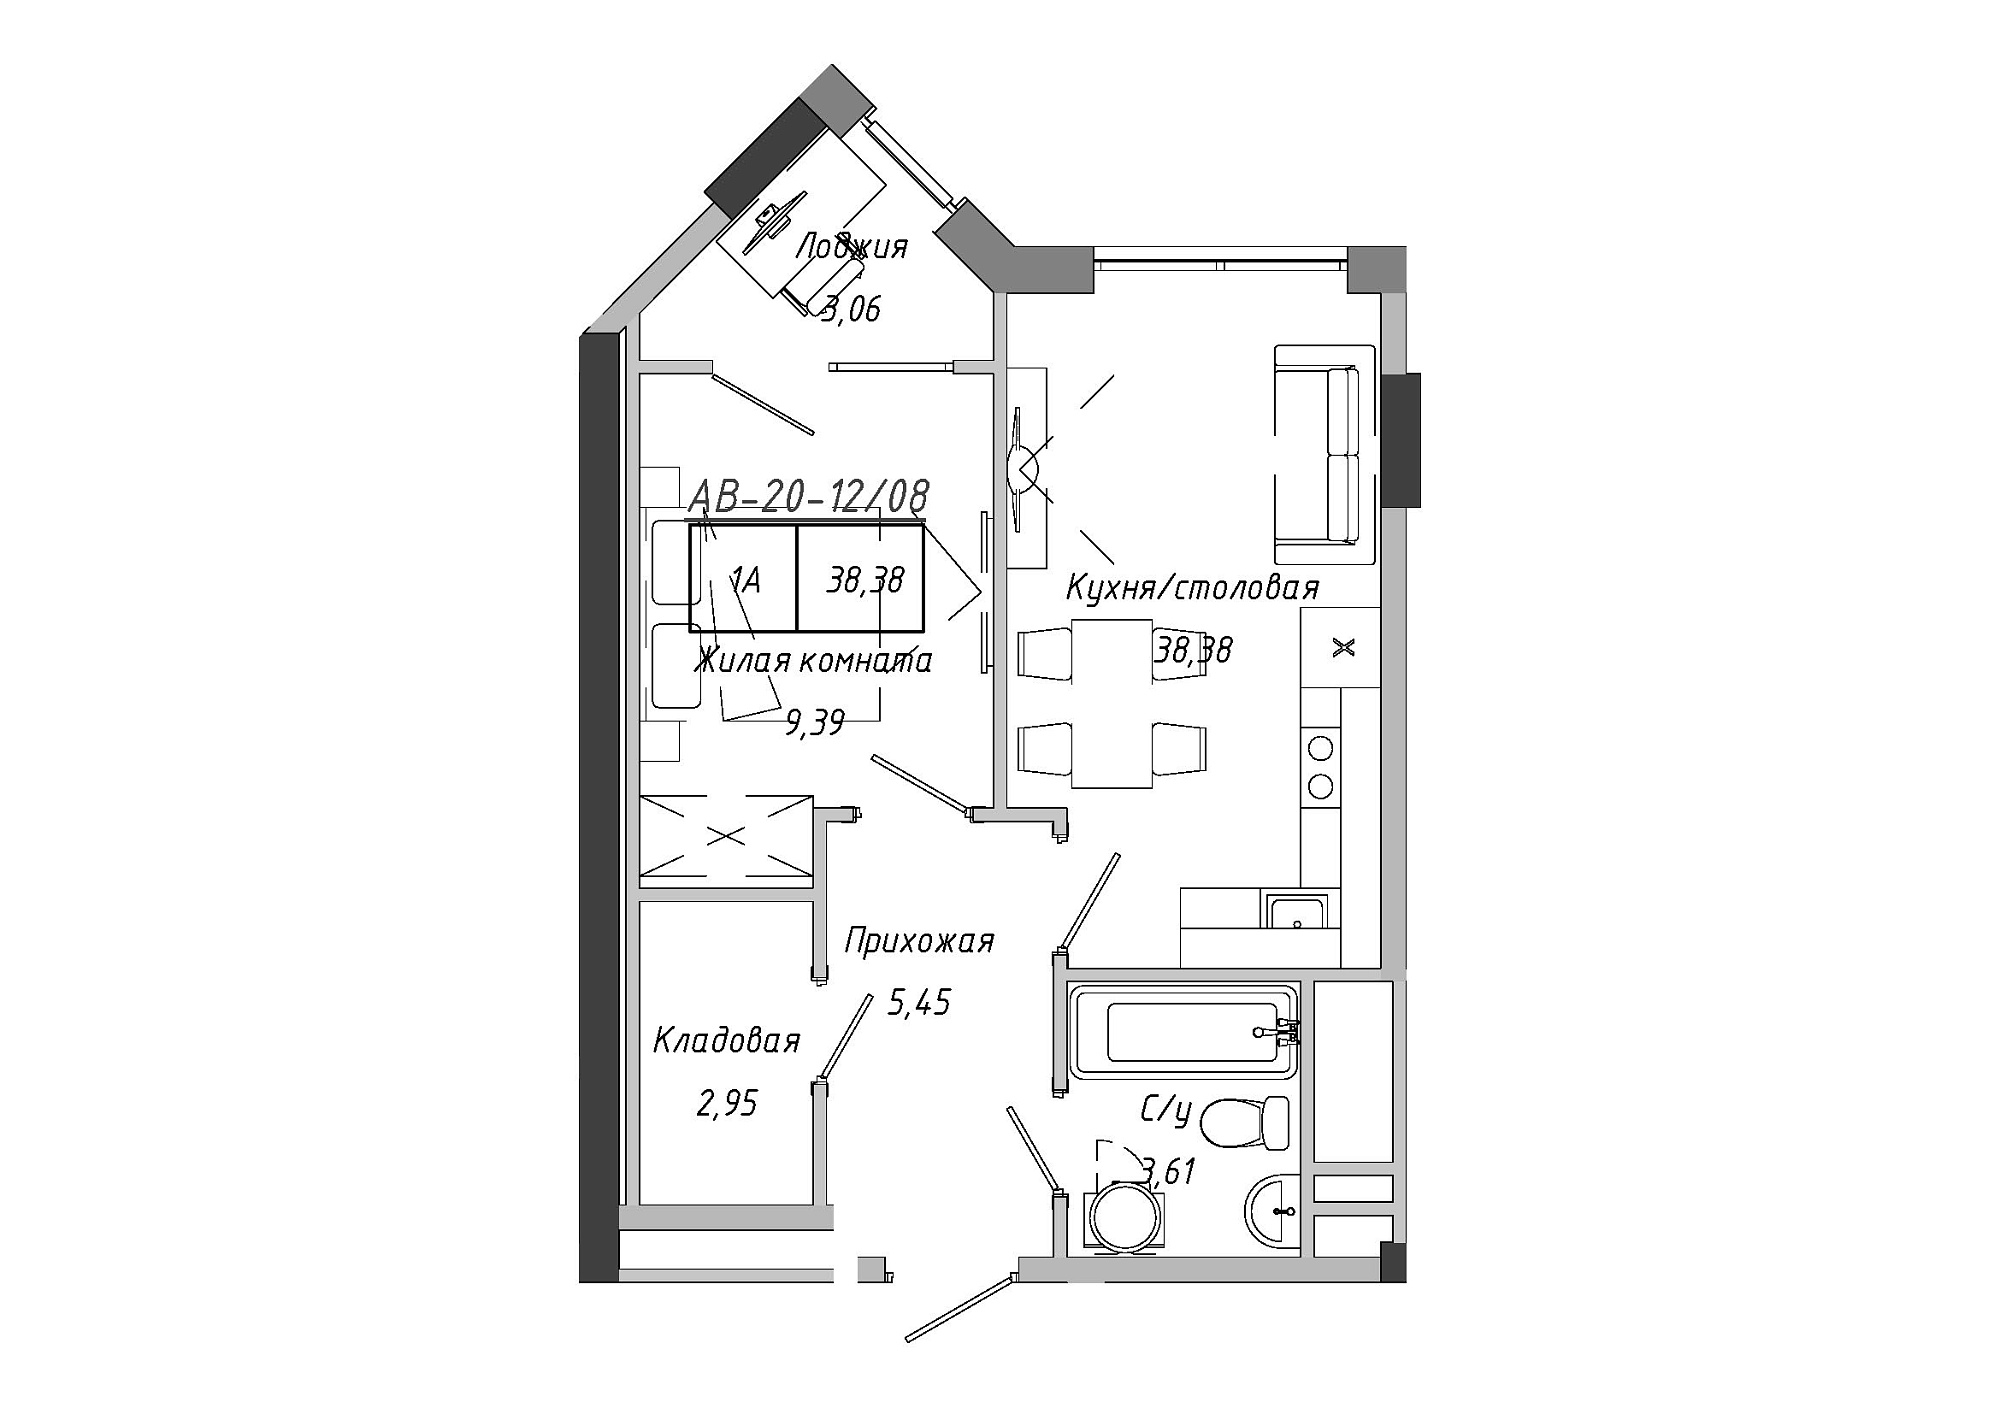 Planning 1-rm flats area 38.85m2, AB-20-12/00008.